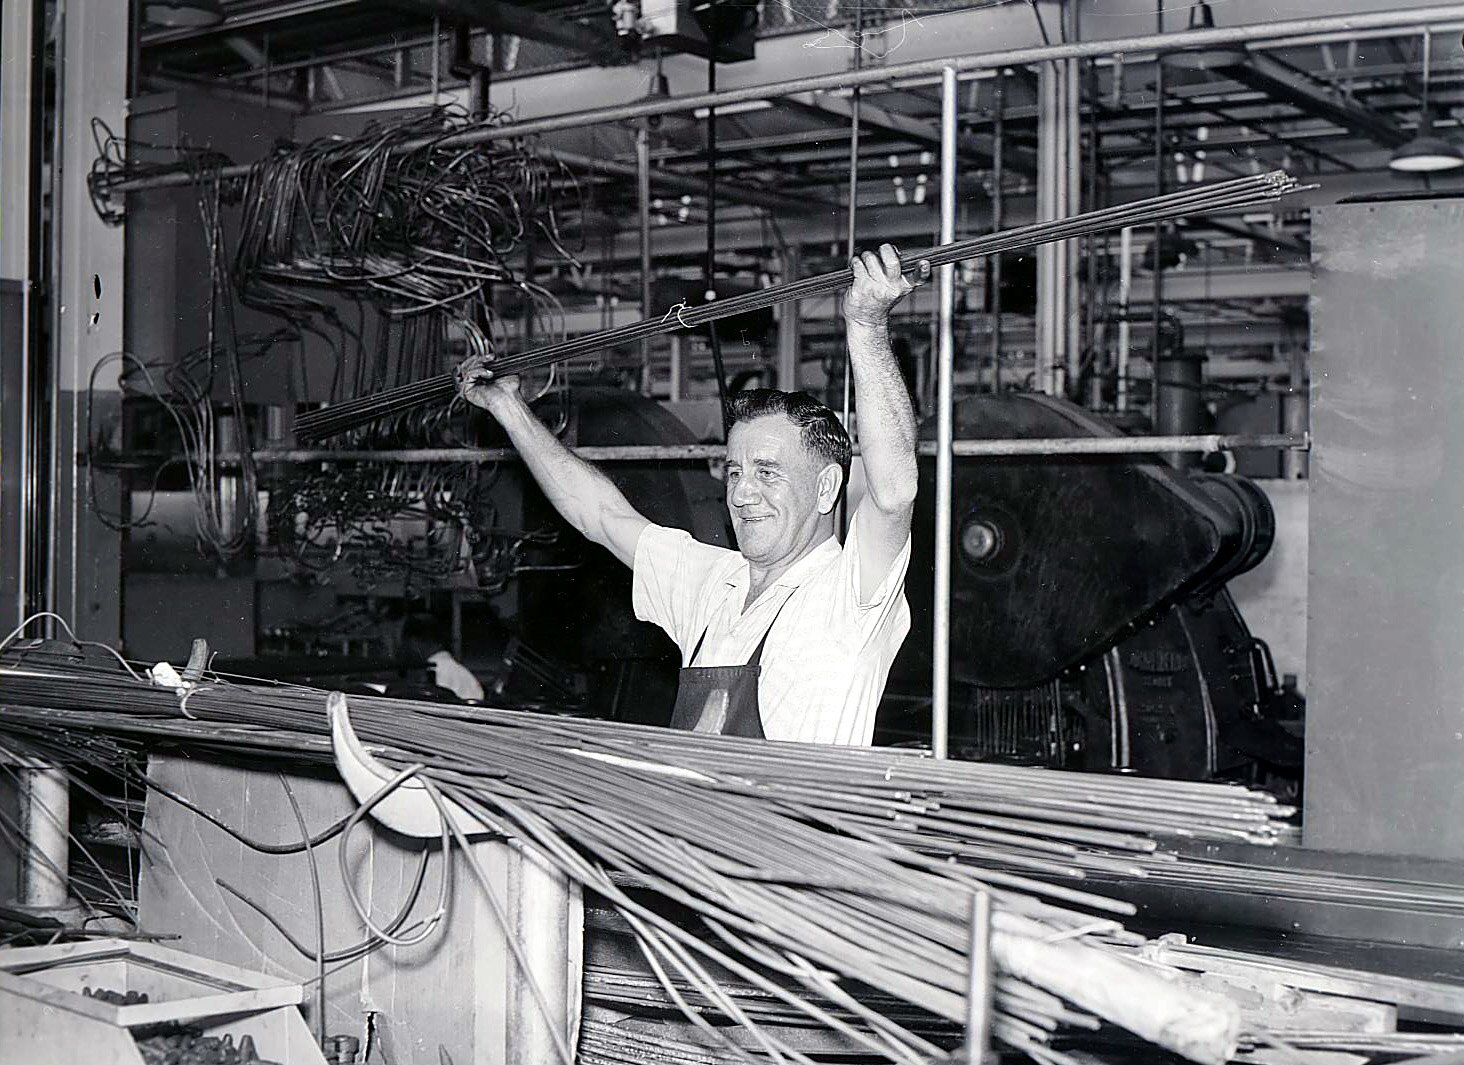 A black and white photograph of a man holding metal tubing above his head in a factory